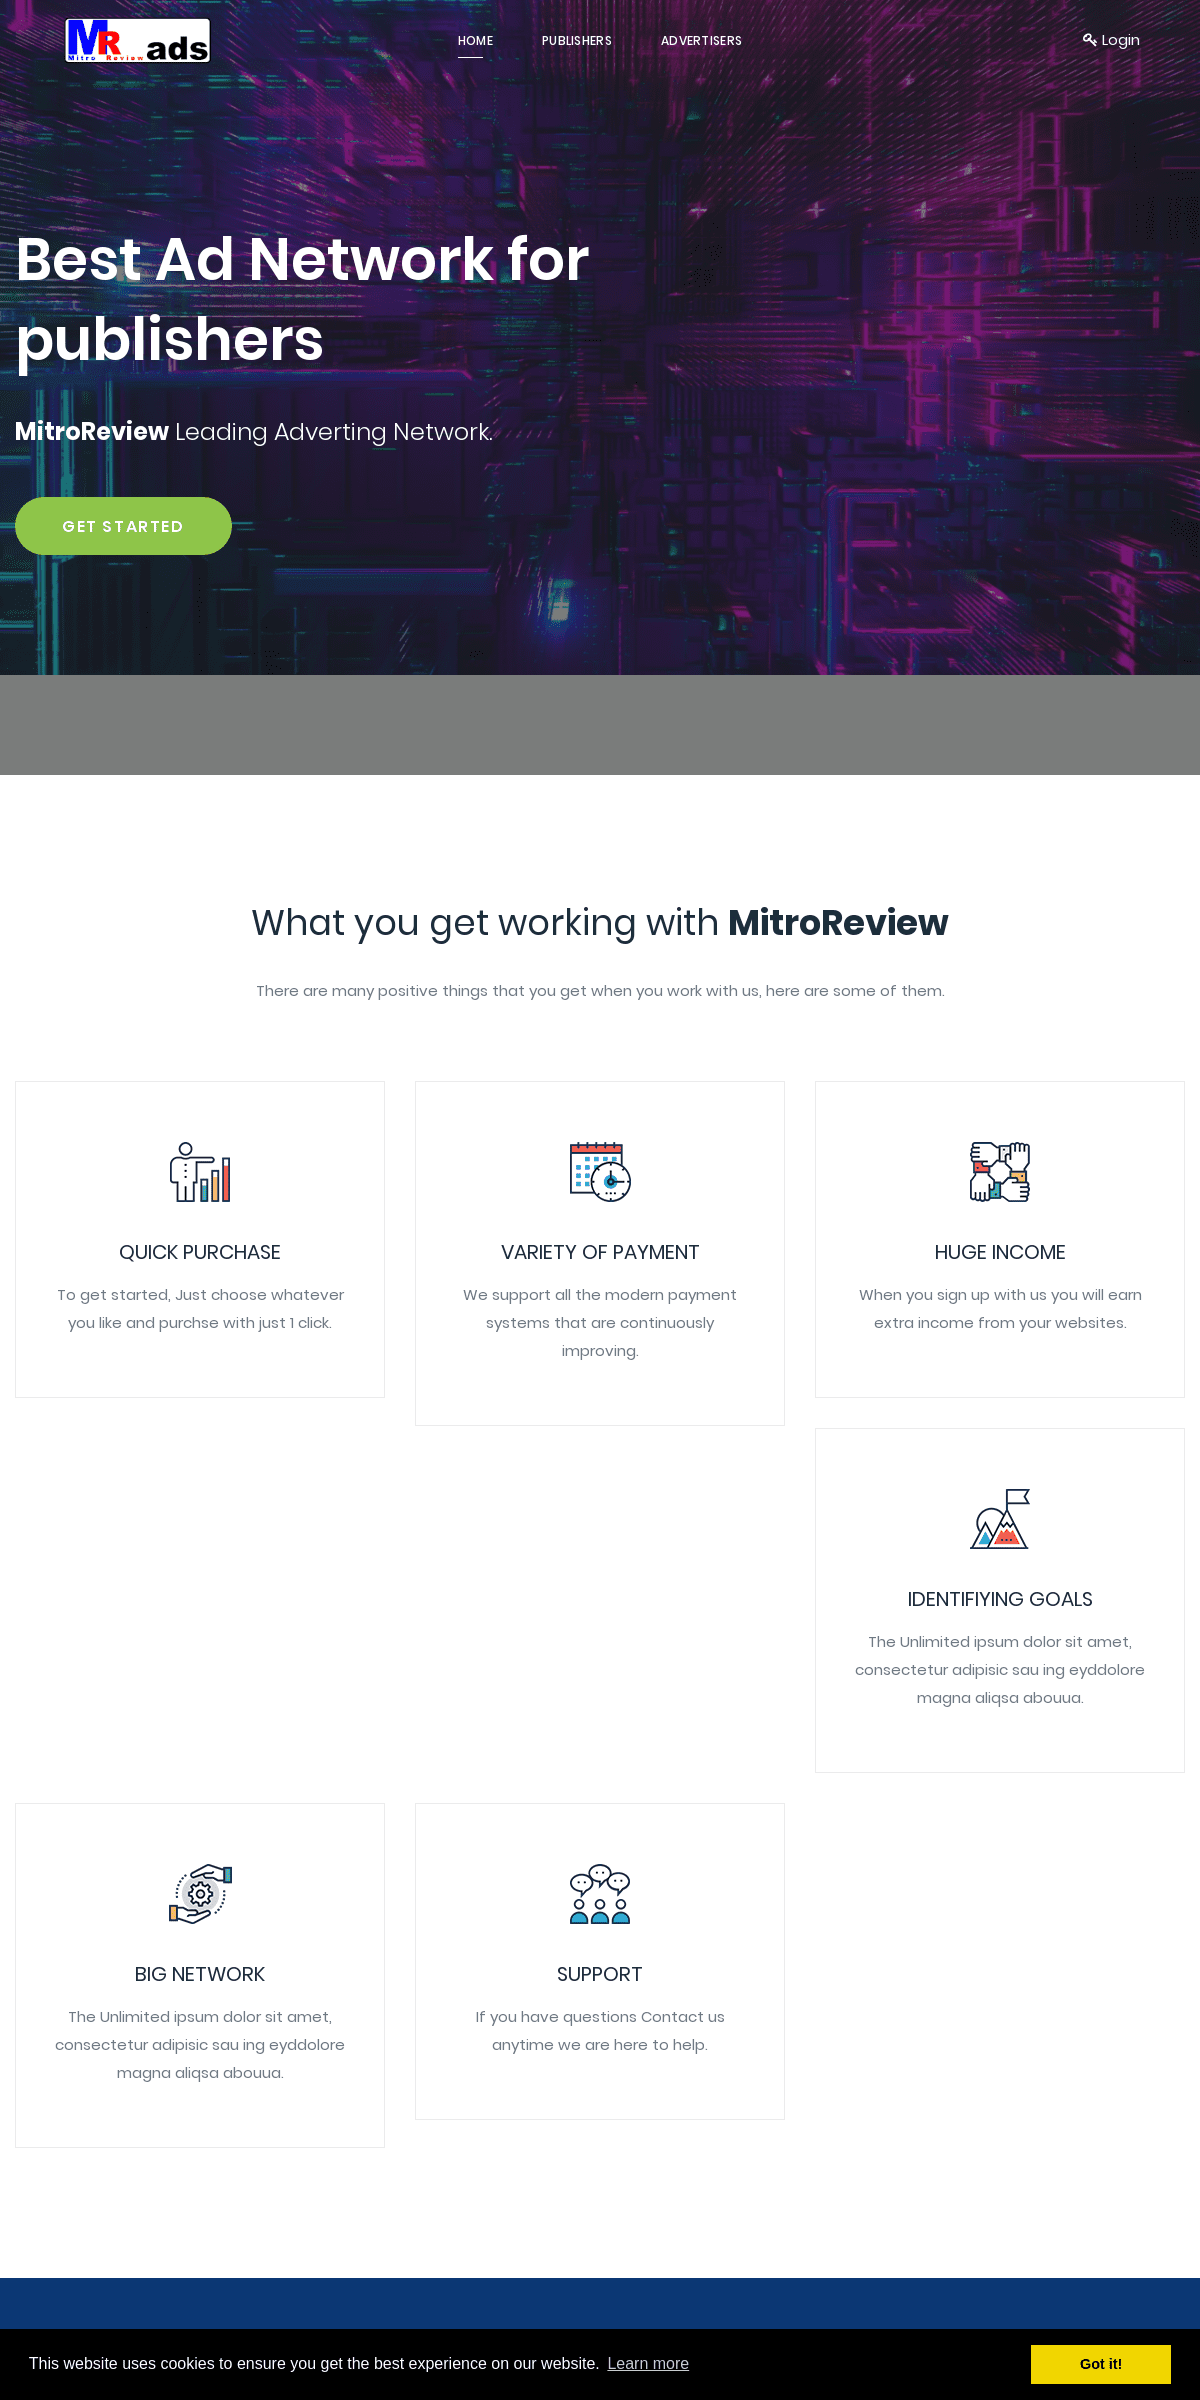 A complete backup of mitroreview.com